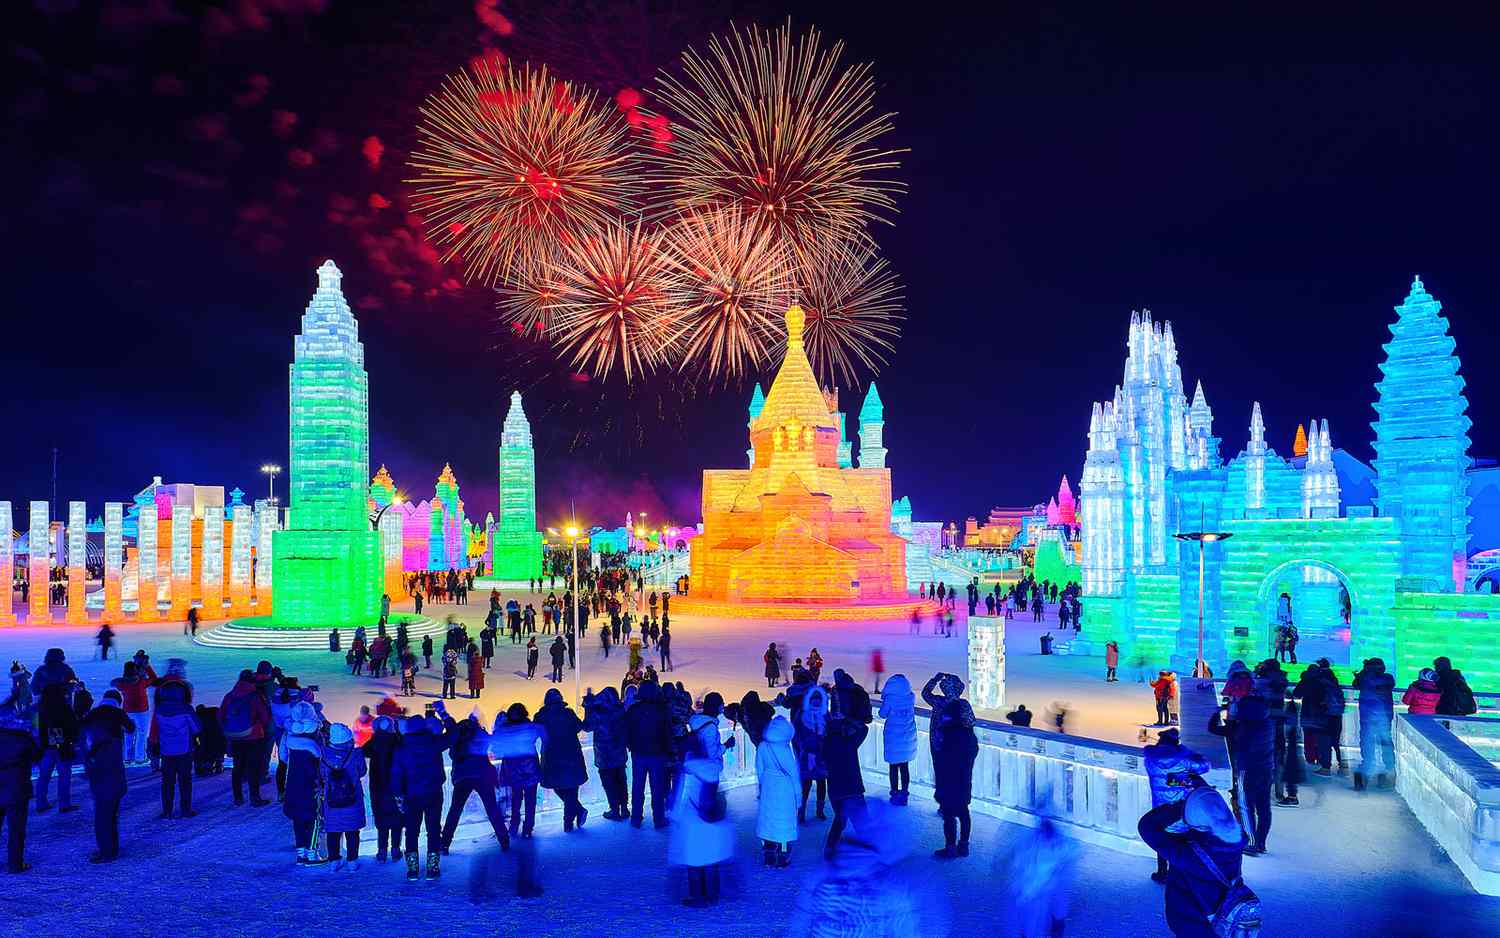 Illuminated ice sculptures at night during the Harbin Ice and Snow Festival